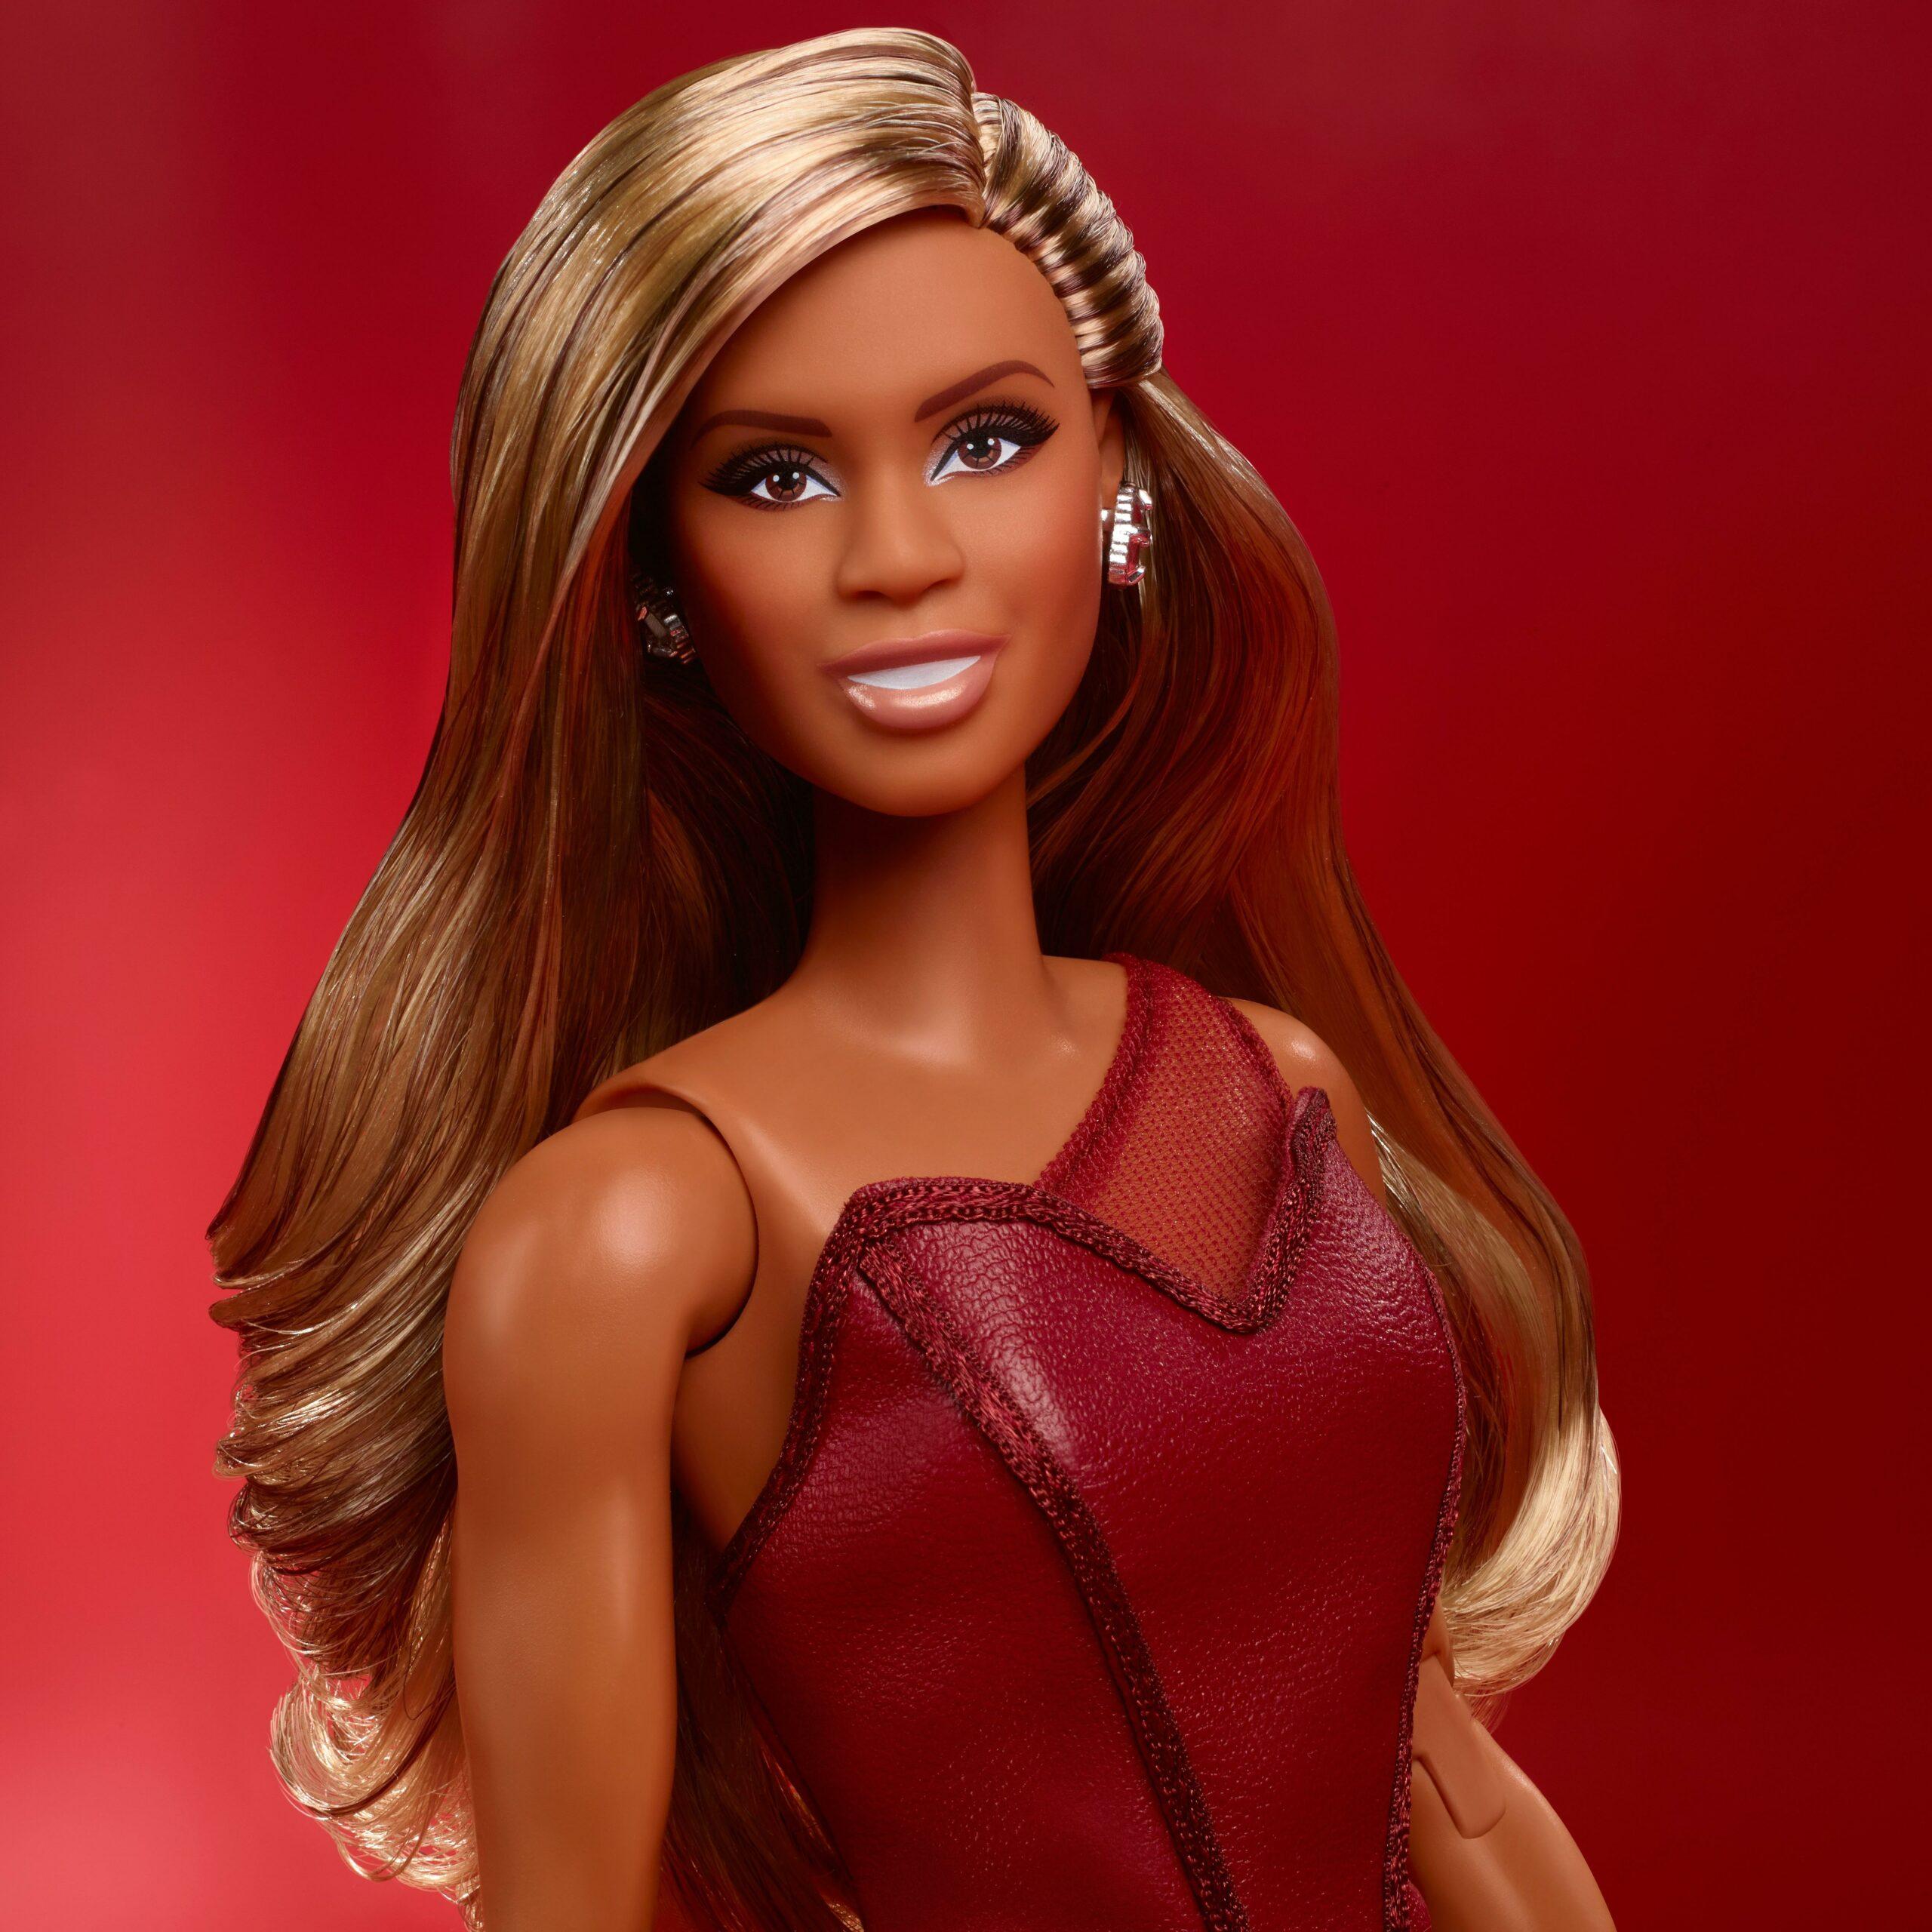 Laverne Cox shows off her own Barbie doll